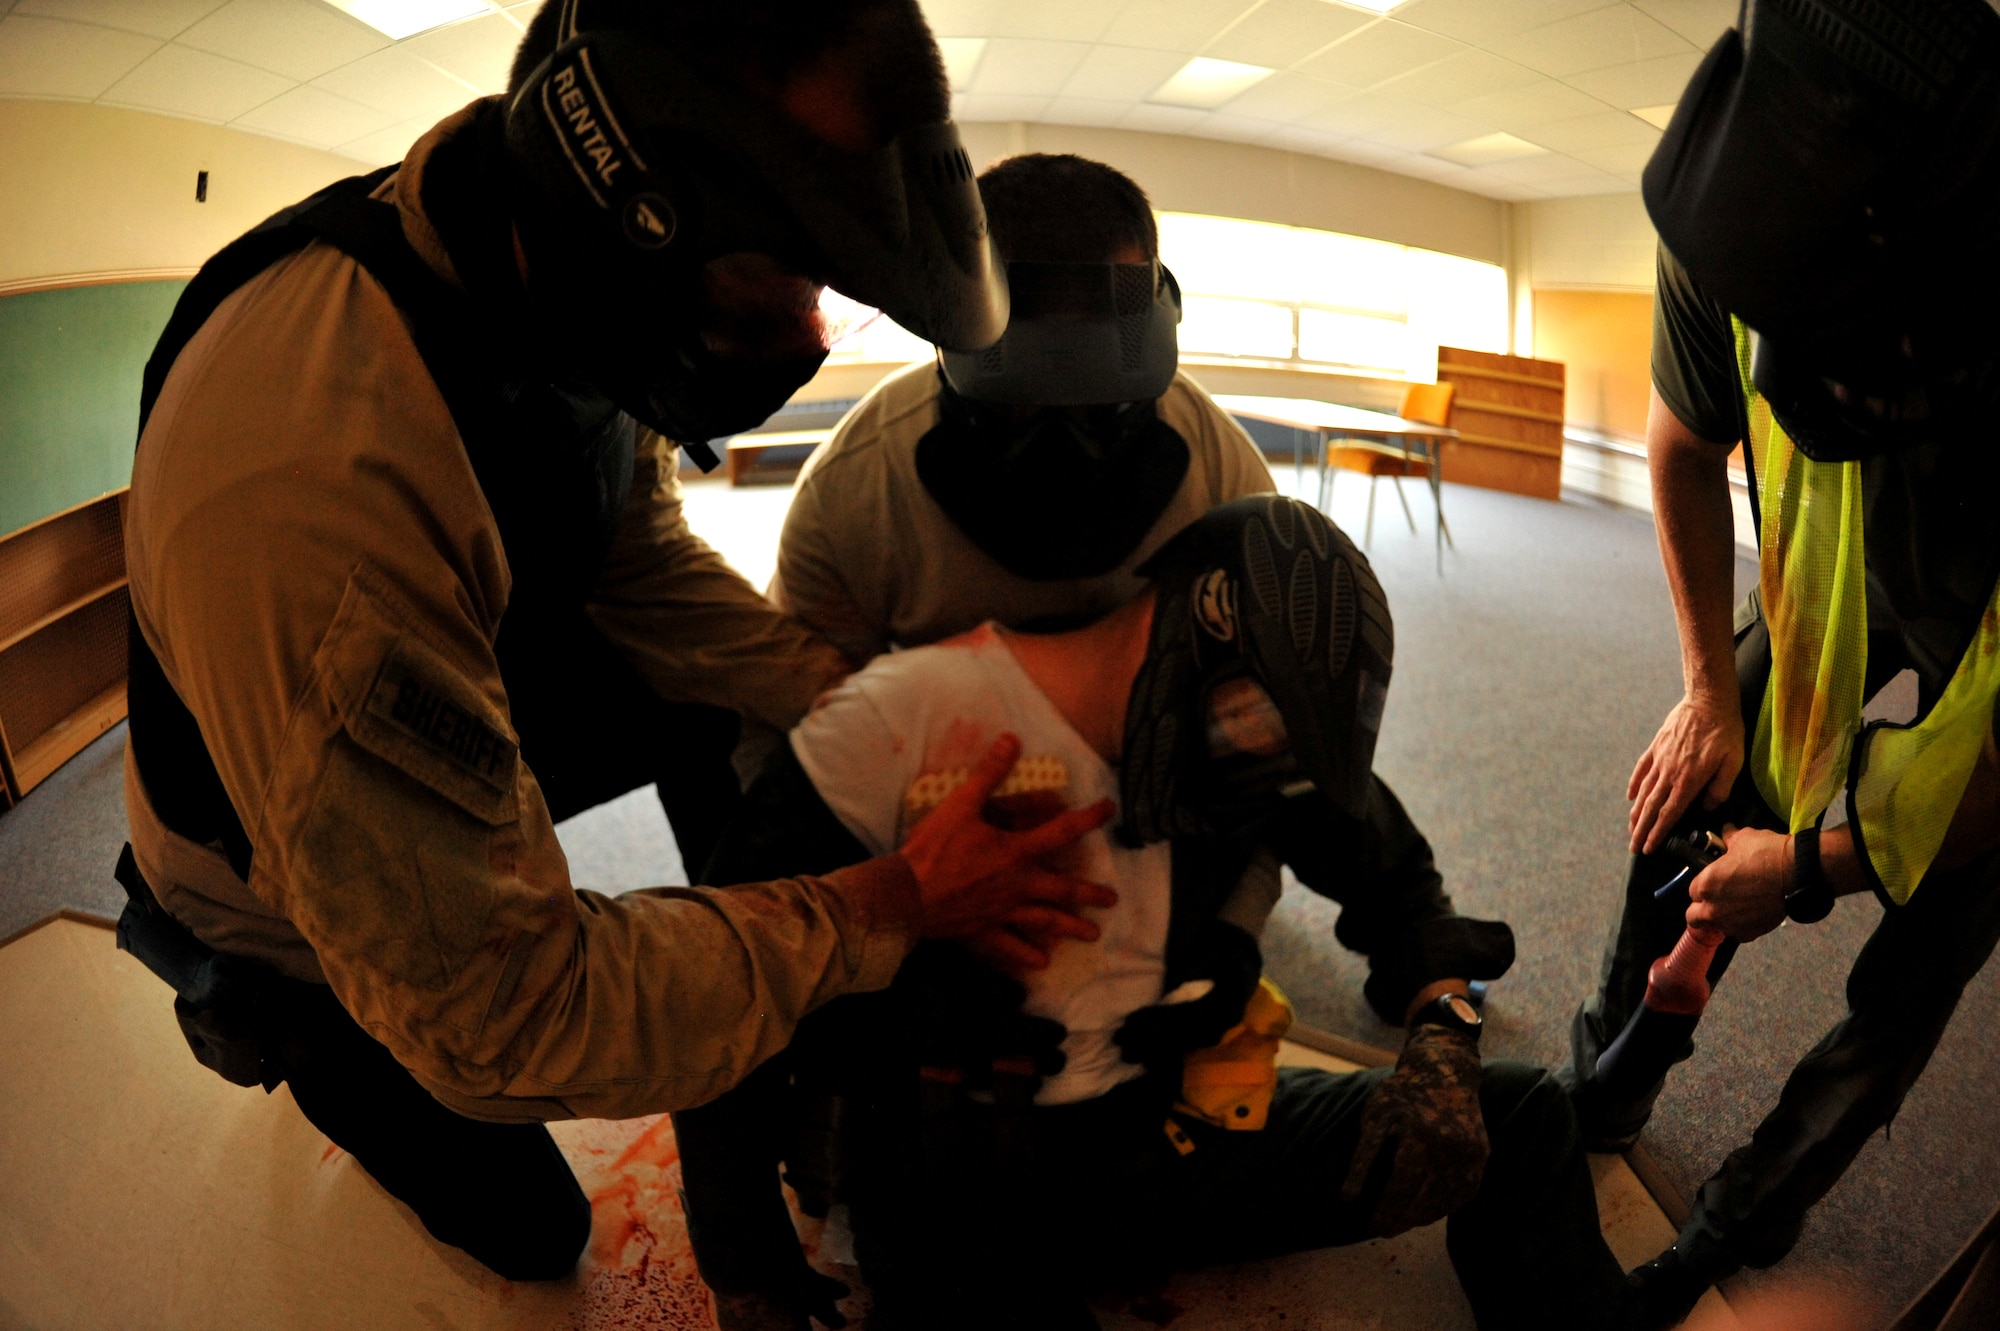 Police officers simulate treating a sucking chest wound during a training exercise Sept. 3, 2015 at Carl Ben Eielson Elementary School on Grand Forks Air Force Base, North Dakota. Nearly two dozen law enforcement officers from various agencies across the region came together here during the first week of September for some classroom and hands-on training dealing with a variety of active shooter scenarios led by trainers from U.S. Customs and Border Protection. (U.S. Air Force photo/Staff Sgt. Susan L. Davis)